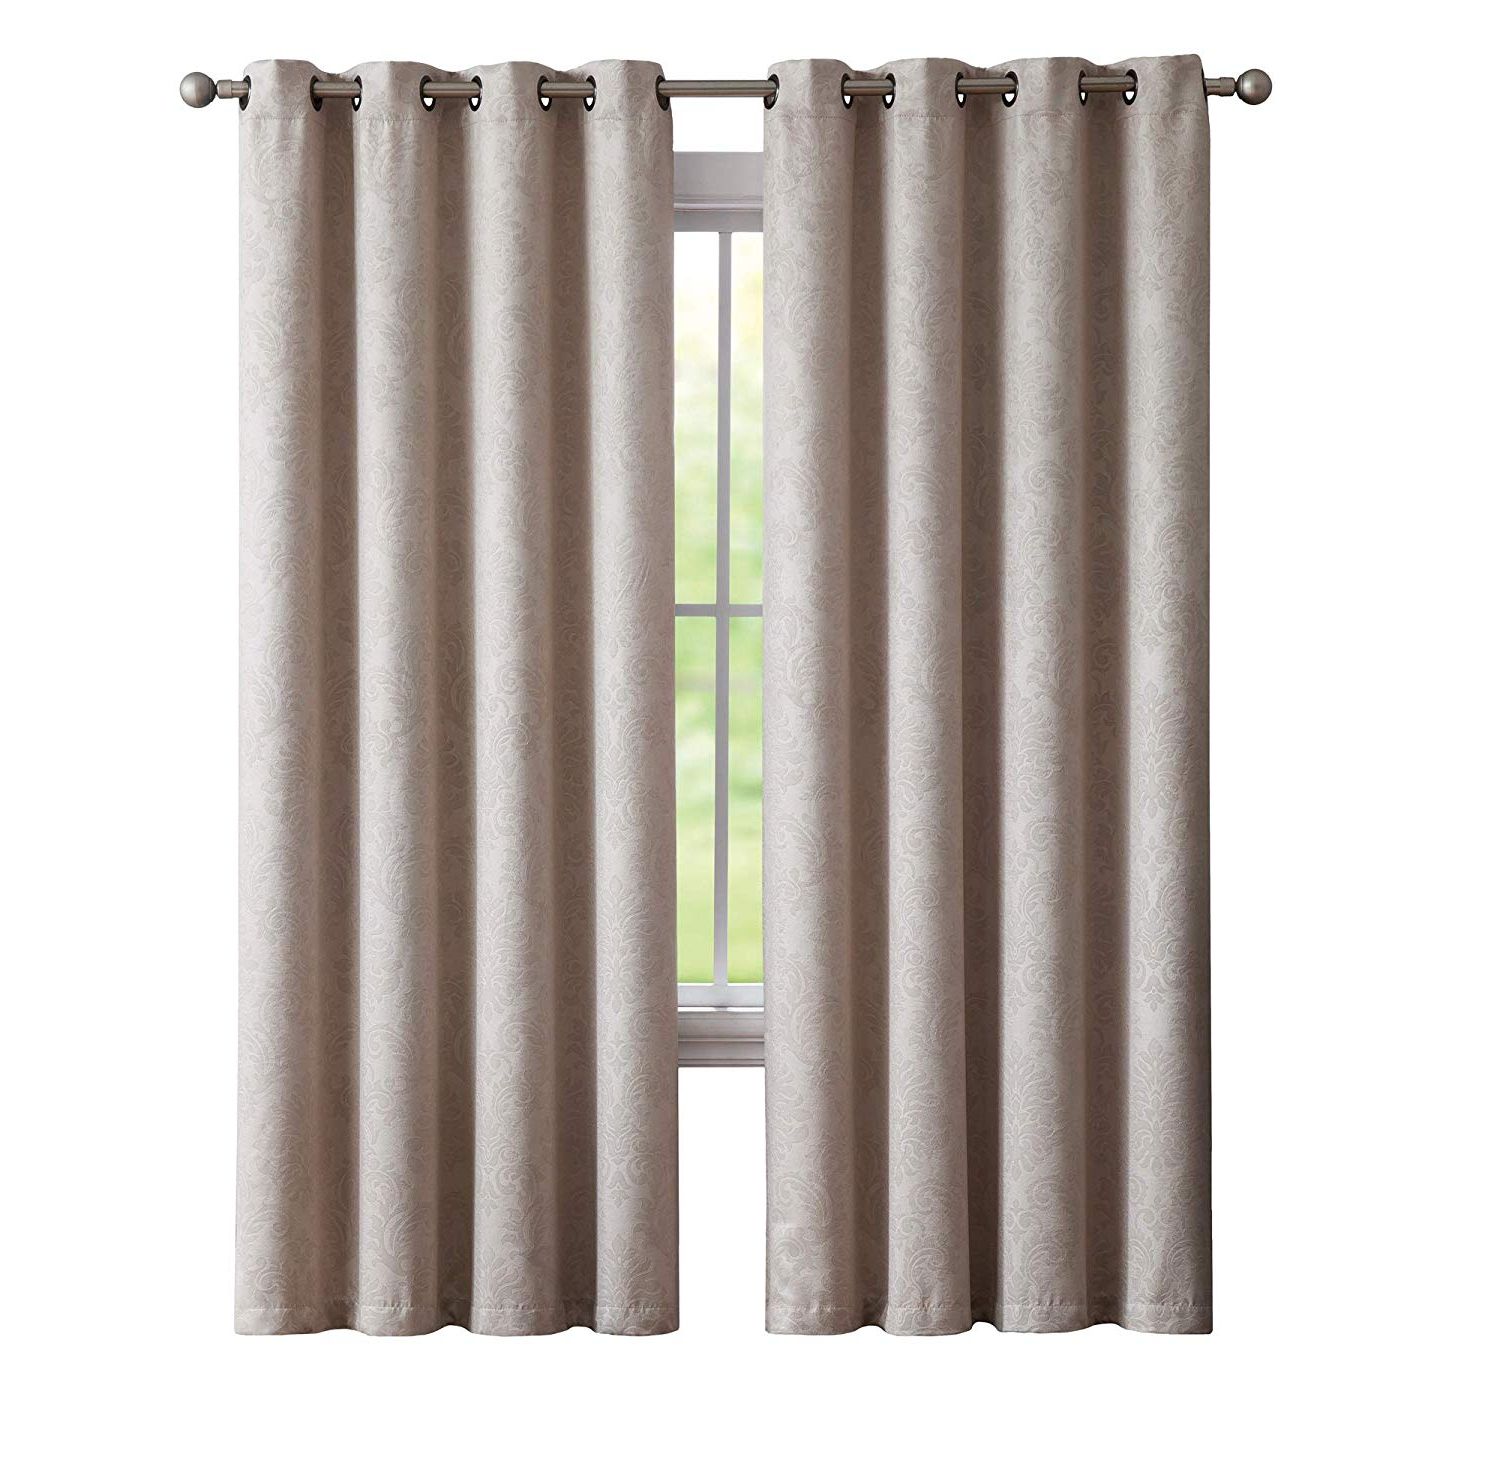 [%evelyn – Embossed Thermal Weaved Blackout Curtain With 8 Grommets – Room  Darkening & Noise Reduction Fabric – Blocks Up To 97% Of Sunlight – Premium Within Best And Newest Embossed Thermal Weaved Blackout Grommet Drapery Curtains|embossed Thermal Weaved Blackout Grommet Drapery Curtains Throughout Well Liked Evelyn – Embossed Thermal Weaved Blackout Curtain With 8 Grommets – Room  Darkening & Noise Reduction Fabric – Blocks Up To 97% Of Sunlight – Premium|current Embossed Thermal Weaved Blackout Grommet Drapery Curtains Intended For Evelyn – Embossed Thermal Weaved Blackout Curtain With 8 Grommets – Room  Darkening & Noise Reduction Fabric – Blocks Up To 97% Of Sunlight – Premium|most Recent Evelyn – Embossed Thermal Weaved Blackout Curtain With 8 Grommets – Room  Darkening & Noise Reduction Fabric – Blocks Up To 97% Of Sunlight – Premium Inside Embossed Thermal Weaved Blackout Grommet Drapery Curtains%] (View 6 of 20)